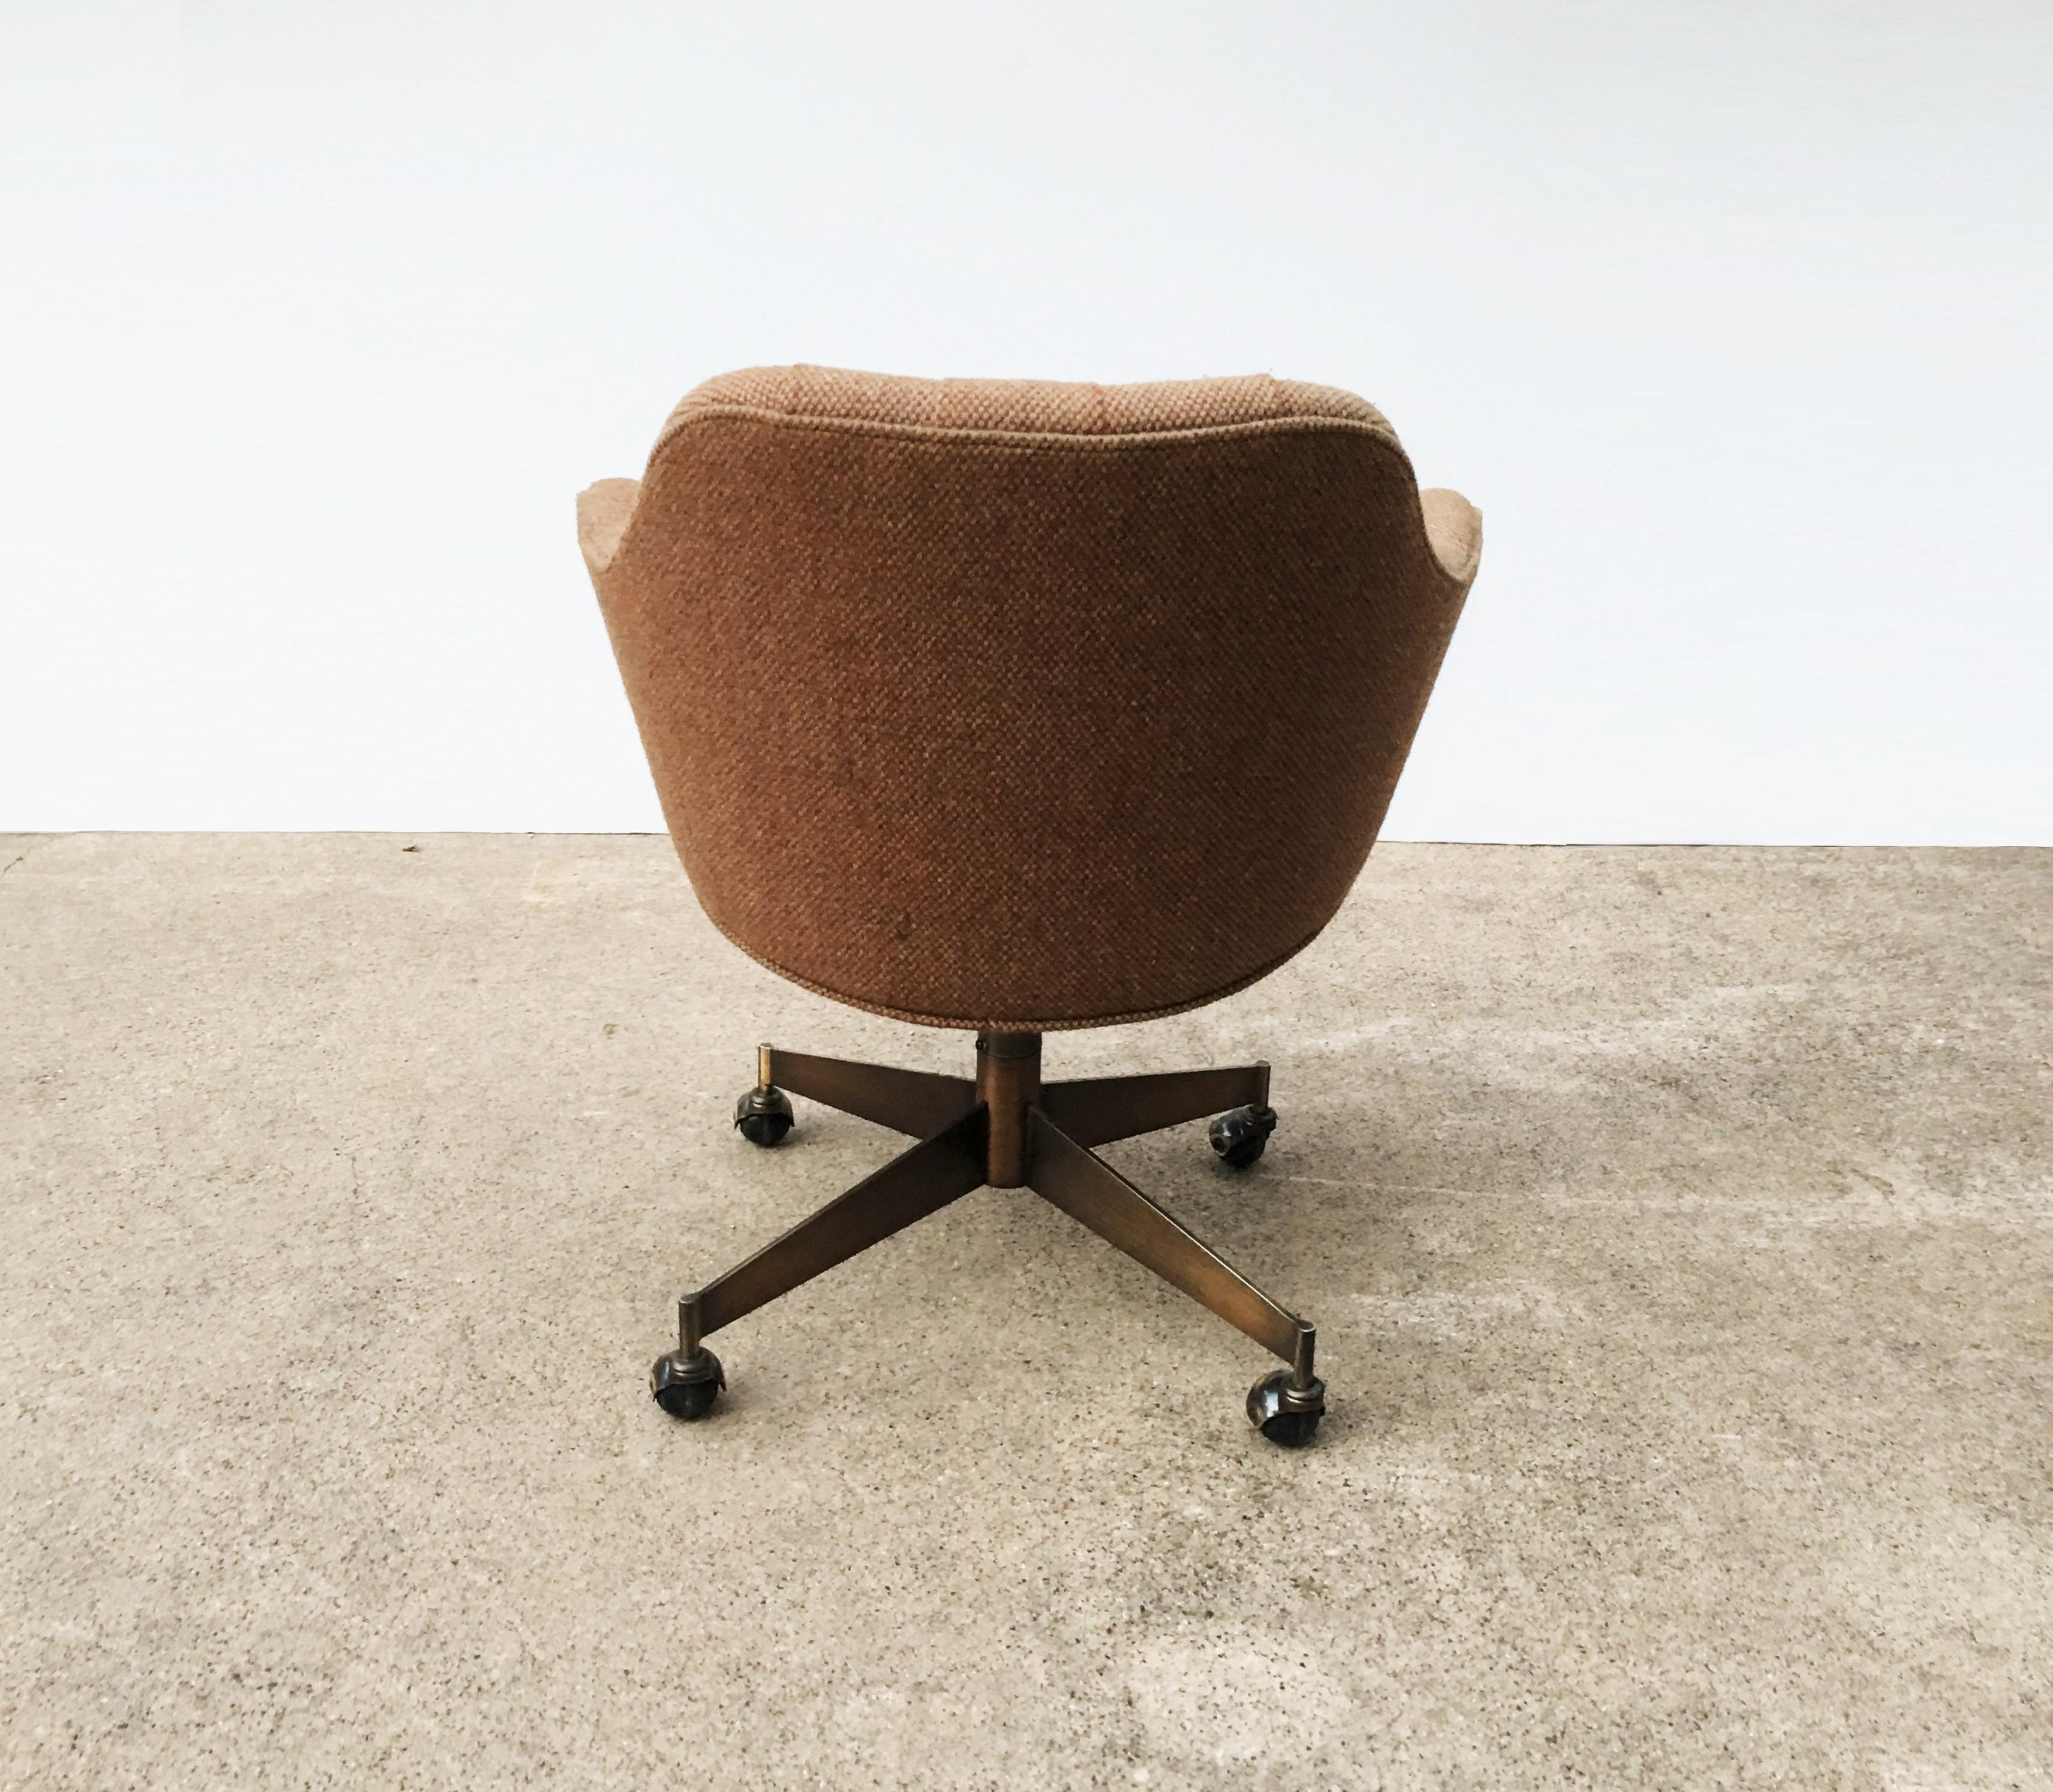 Brushed Set of Ten Modern Tufted Swivel Chairs by Jack Cartwright